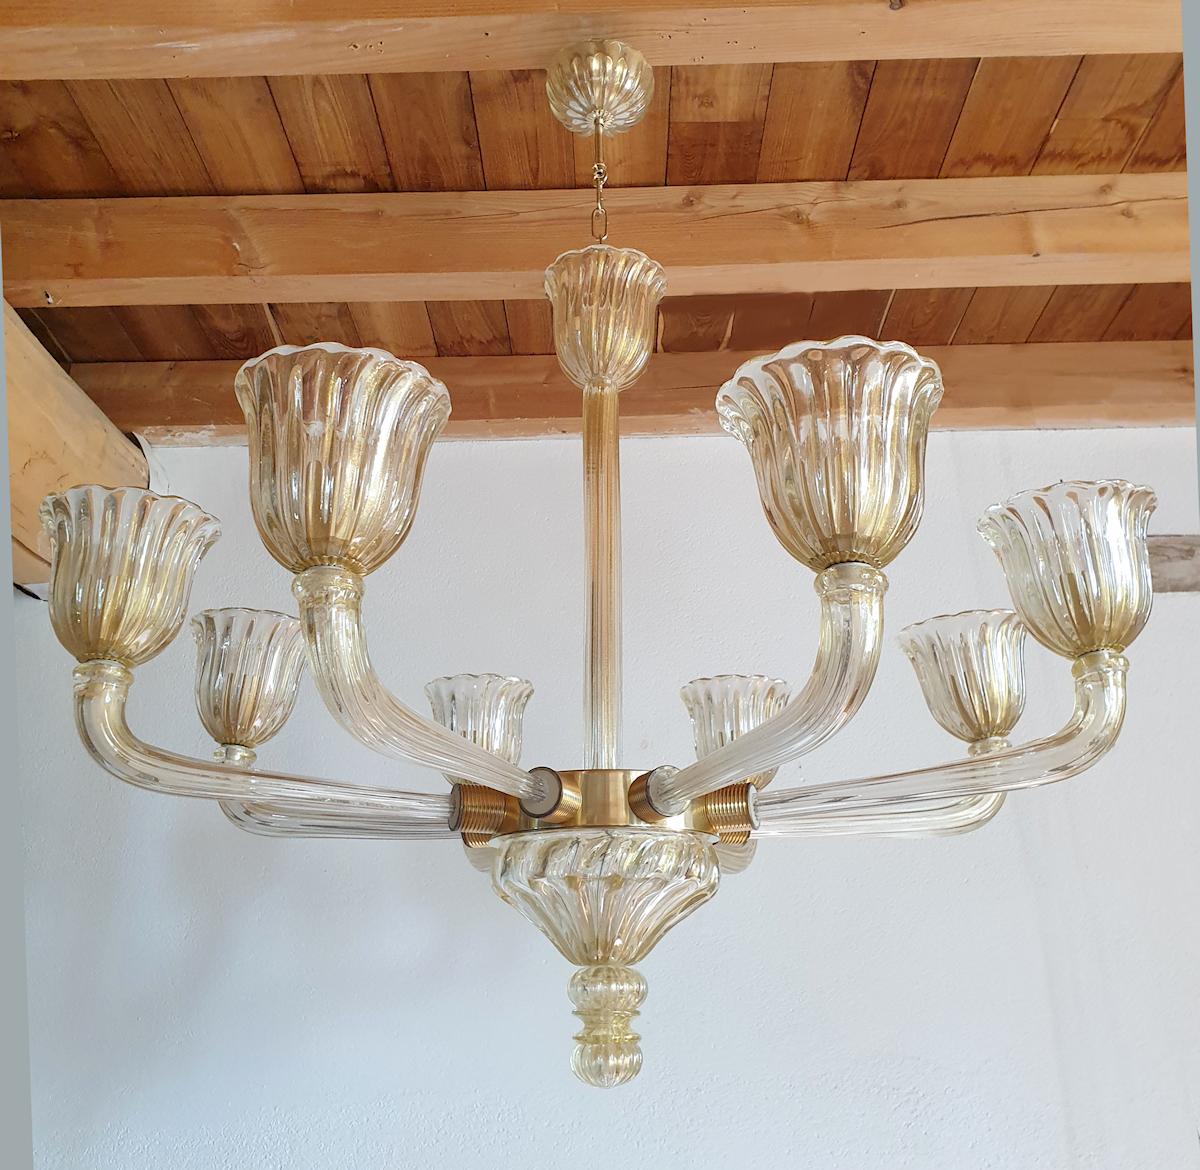 Vintage neoclassical style, Murano glass chandelier, by Barovier and Toso, Italy, 1960s.
The Mid-Century Modern chandelier is made of thick handmade clear Murano glass, with gold leaf inclusion, creating a warm transparent color; and translucent